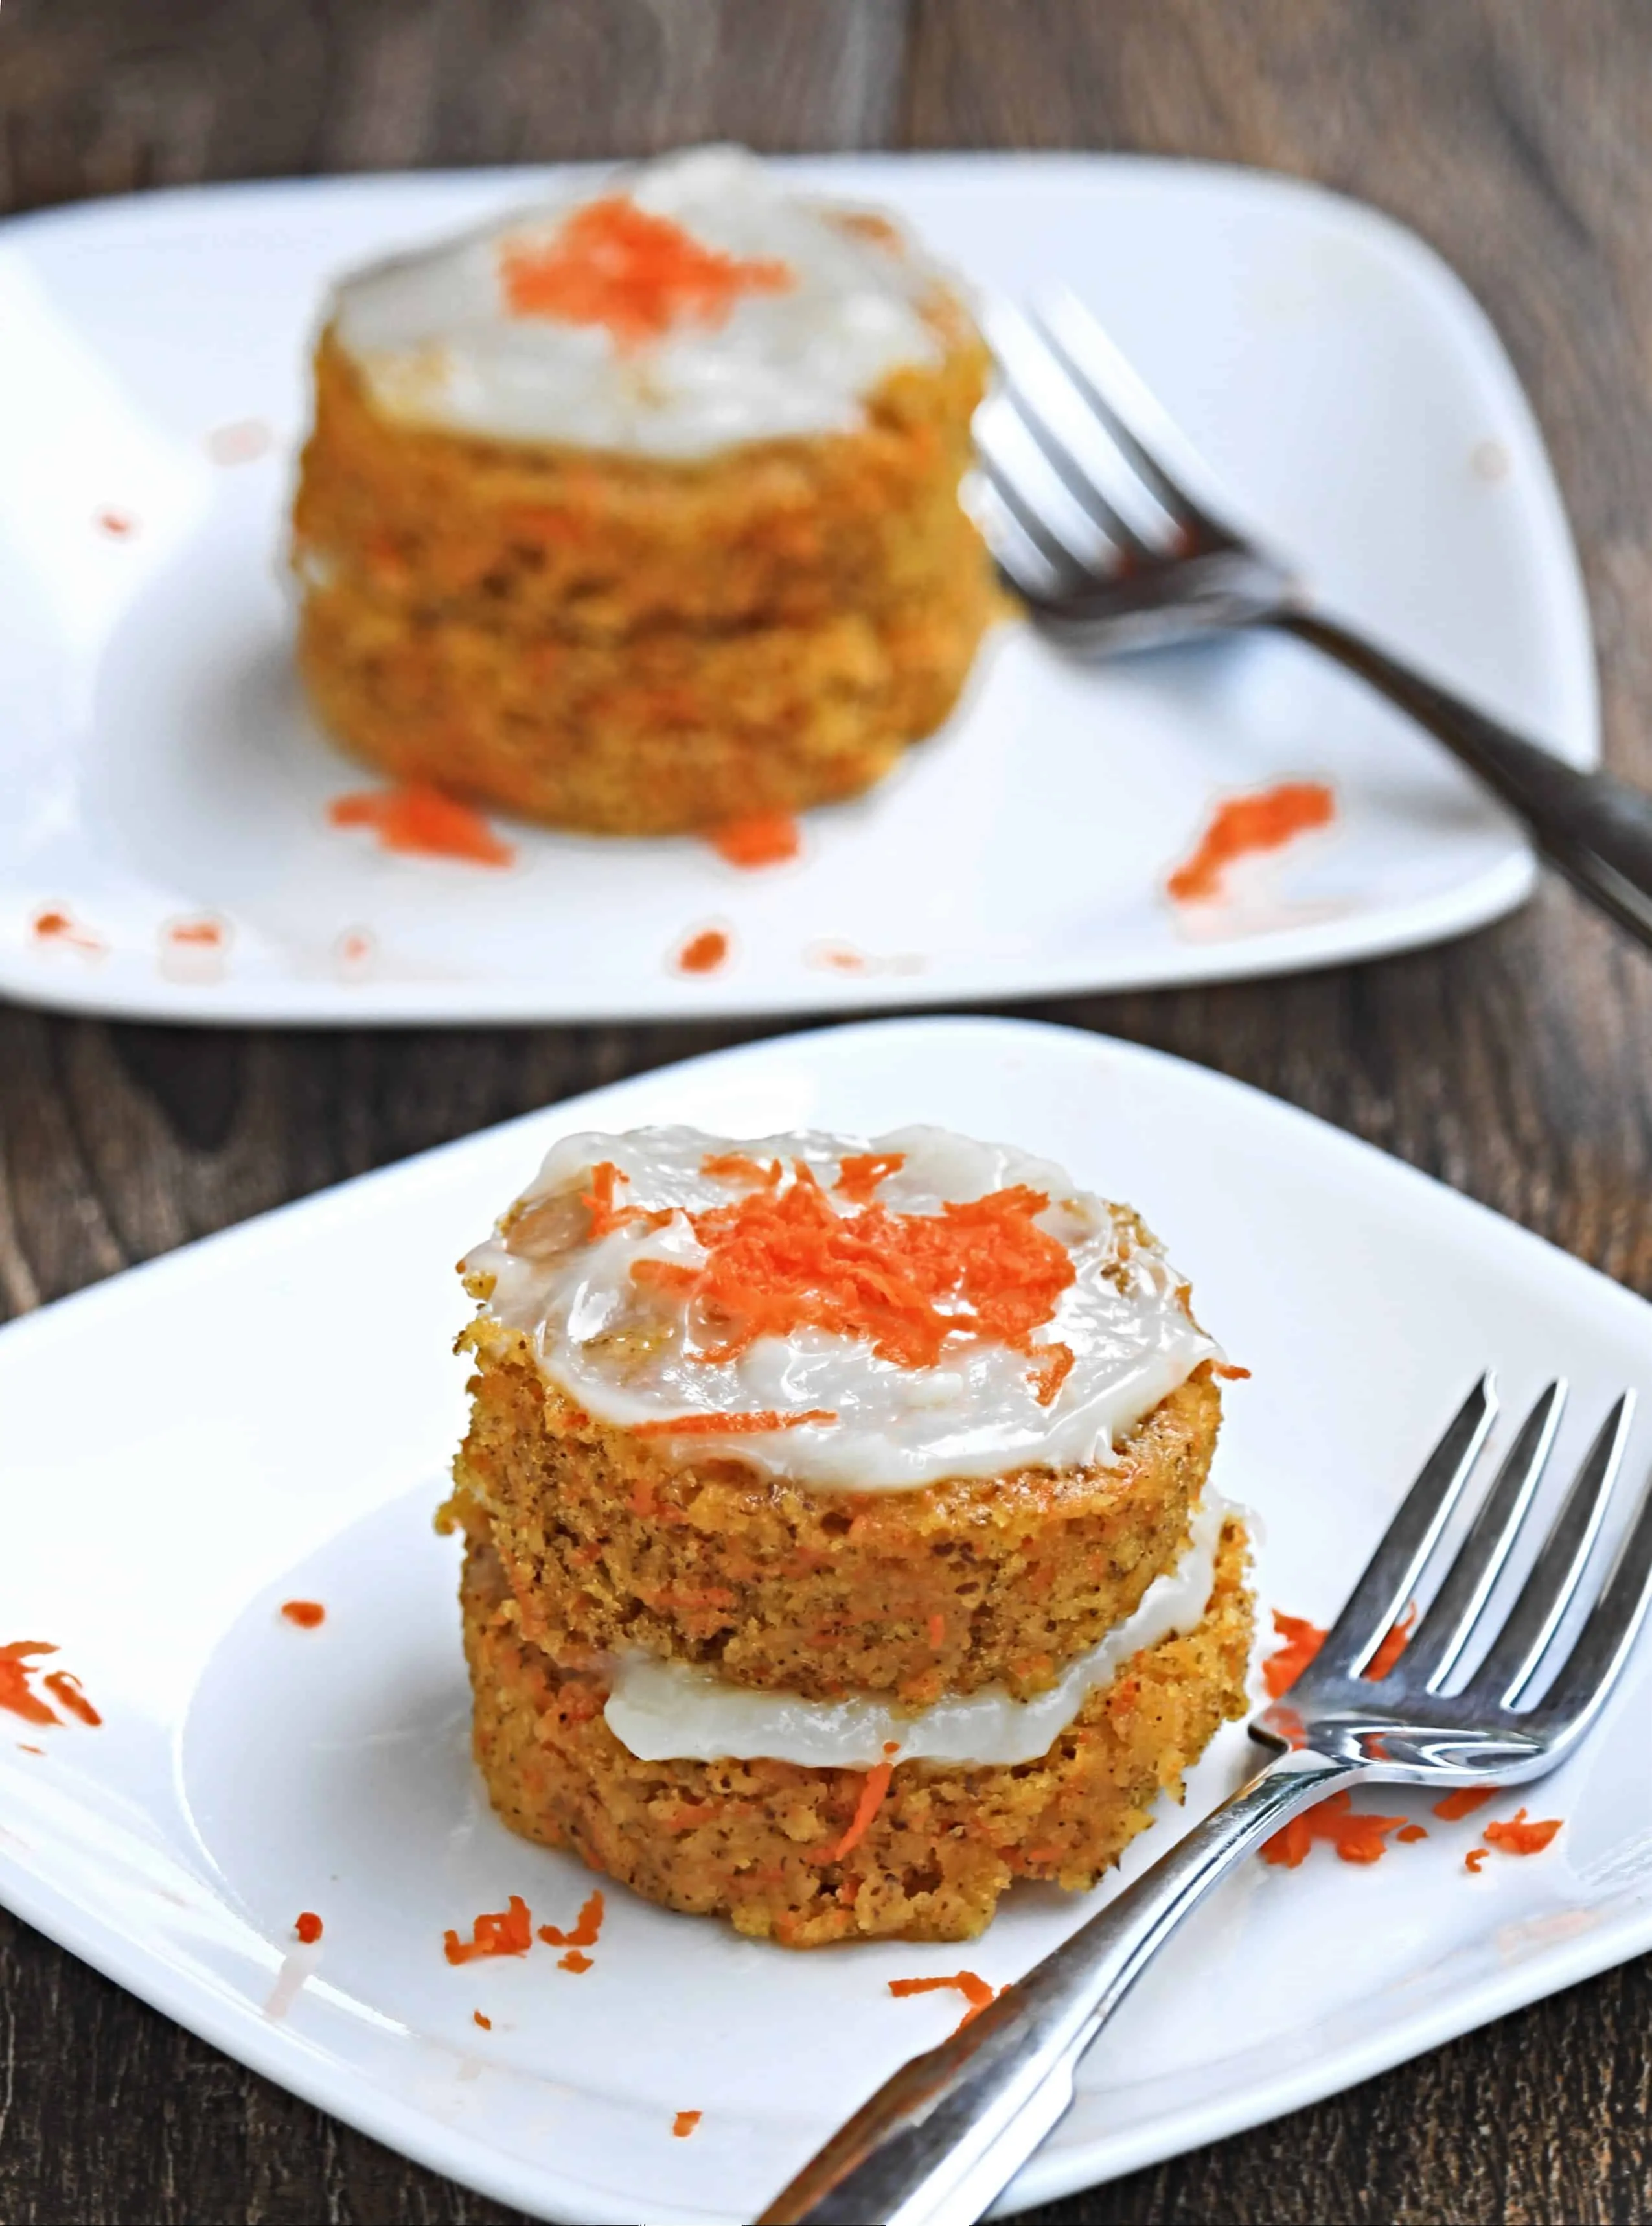 Carrot cake two layered with frosting and carrot grating as garnish